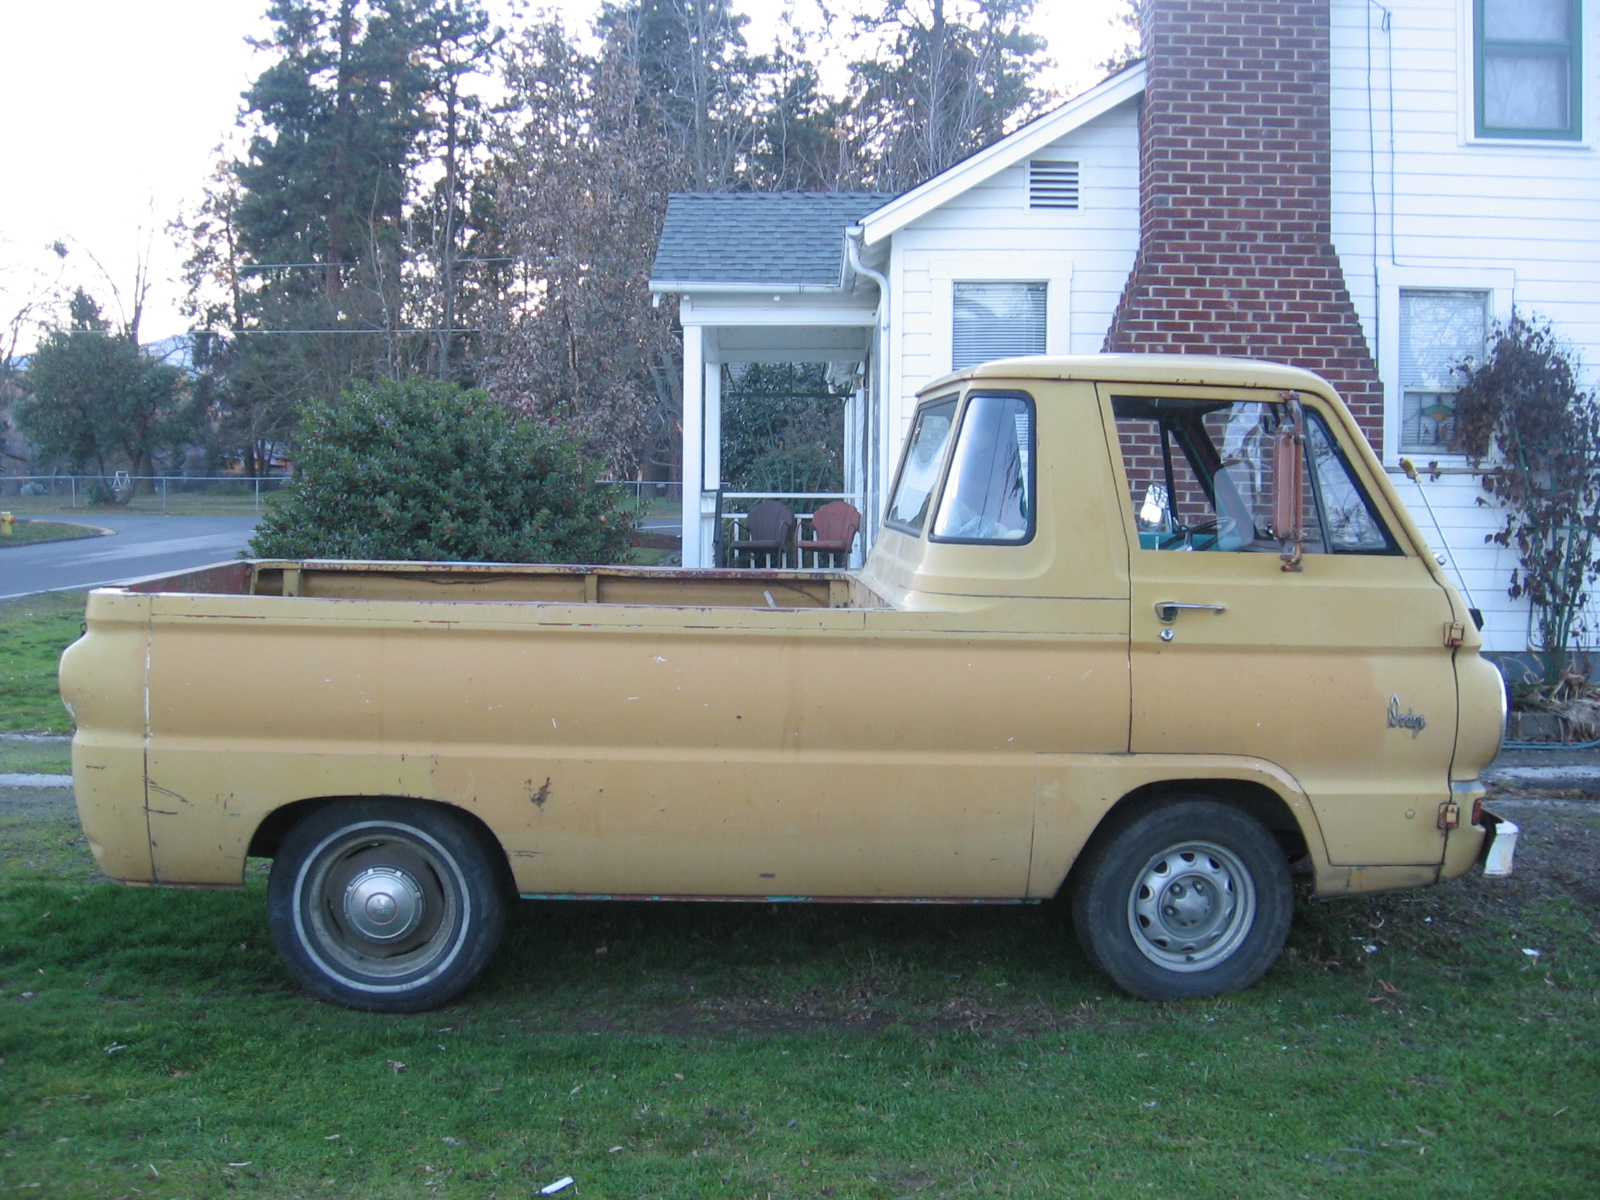 Wanted: Any information on where to get a new set of 1967 Dodge A100 compact